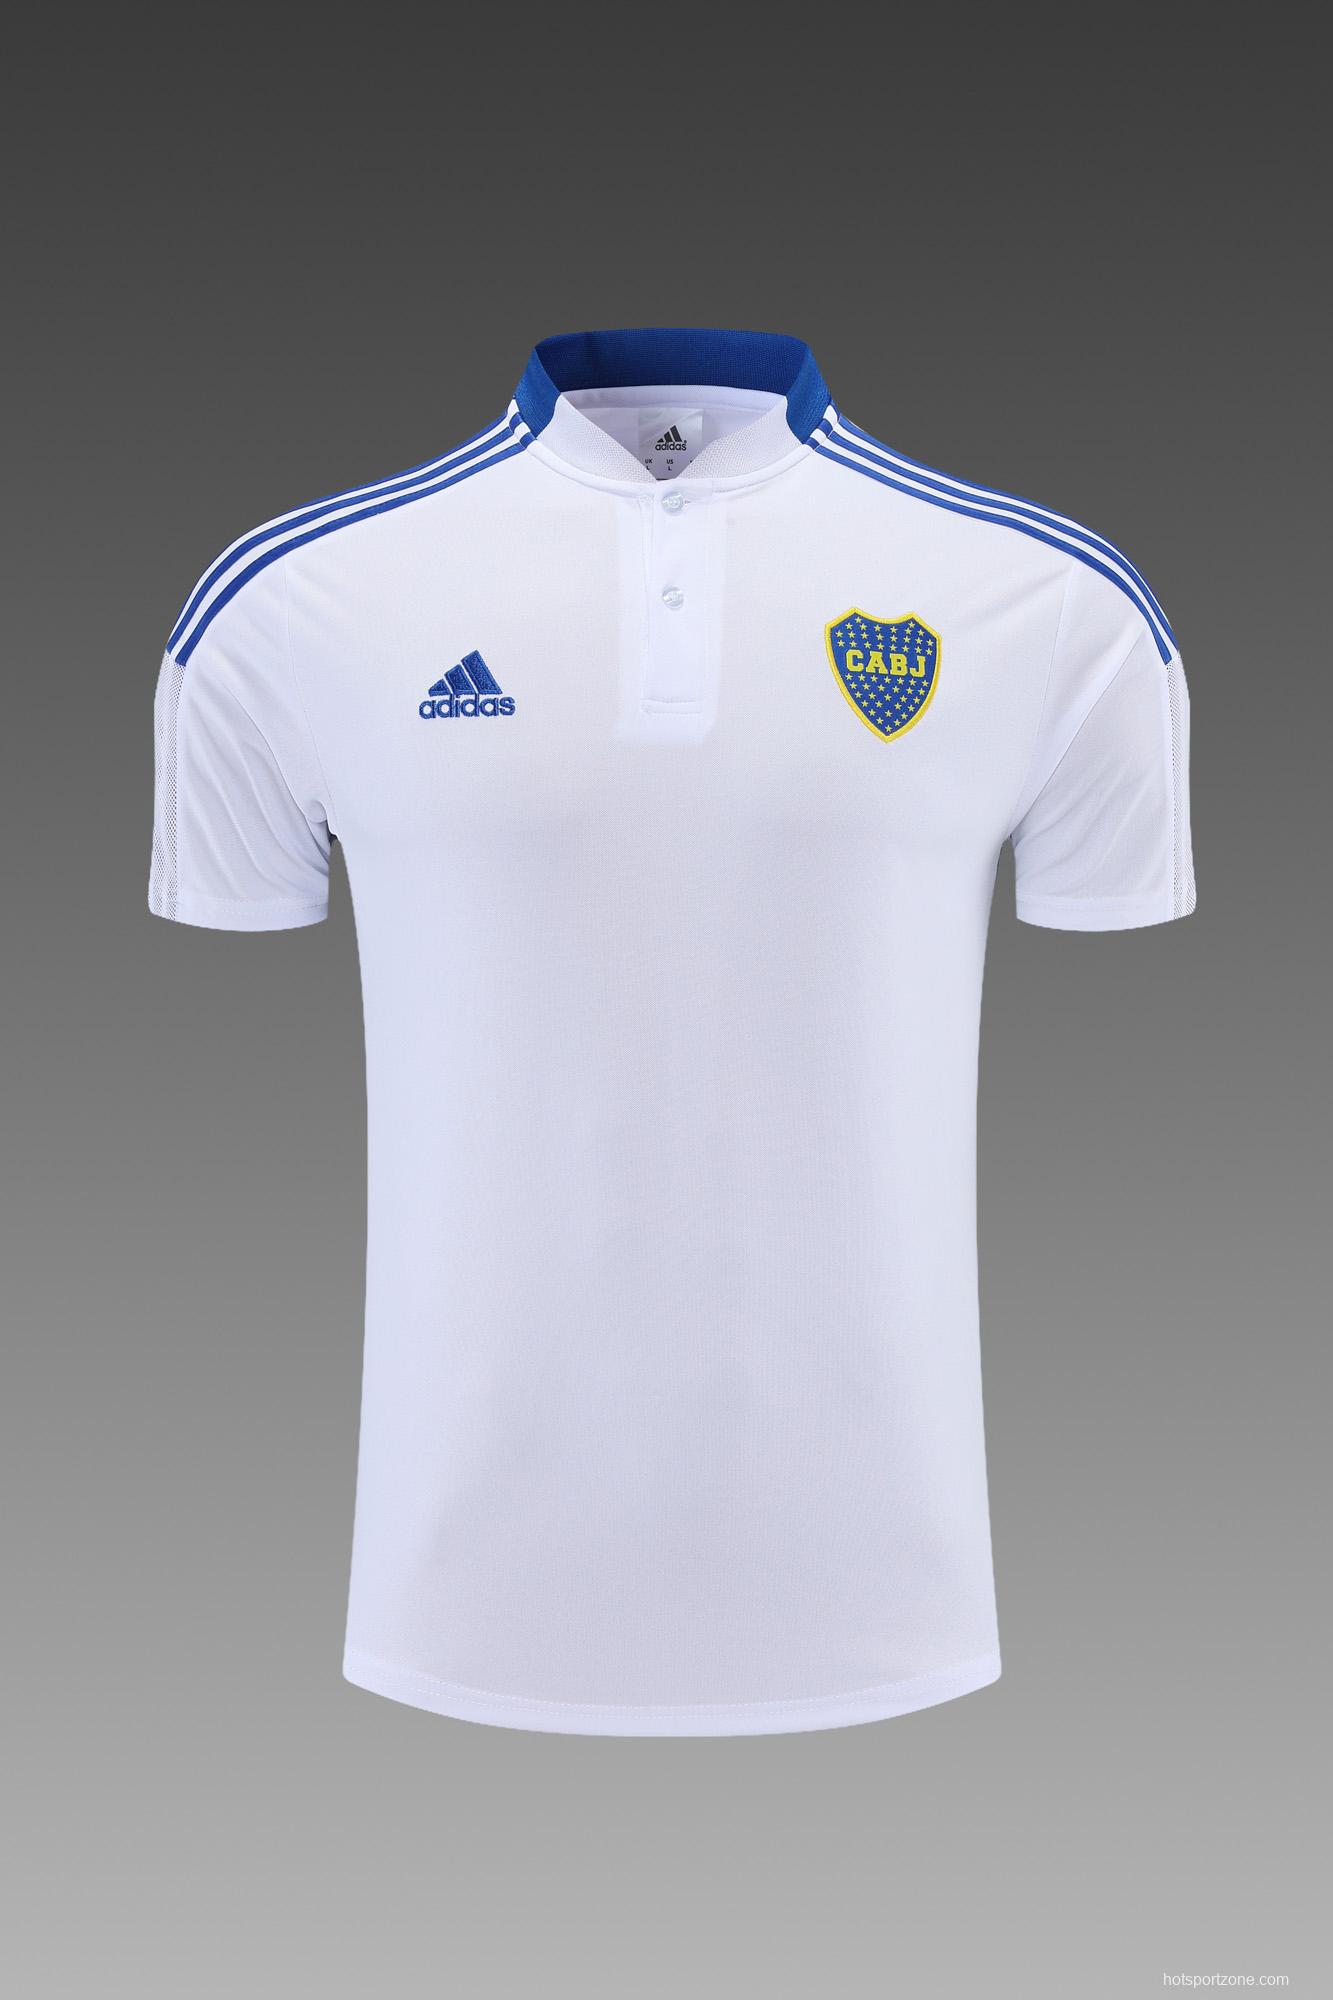 Boca Juniors POLO kit White Blue (not supported to be sold separately)